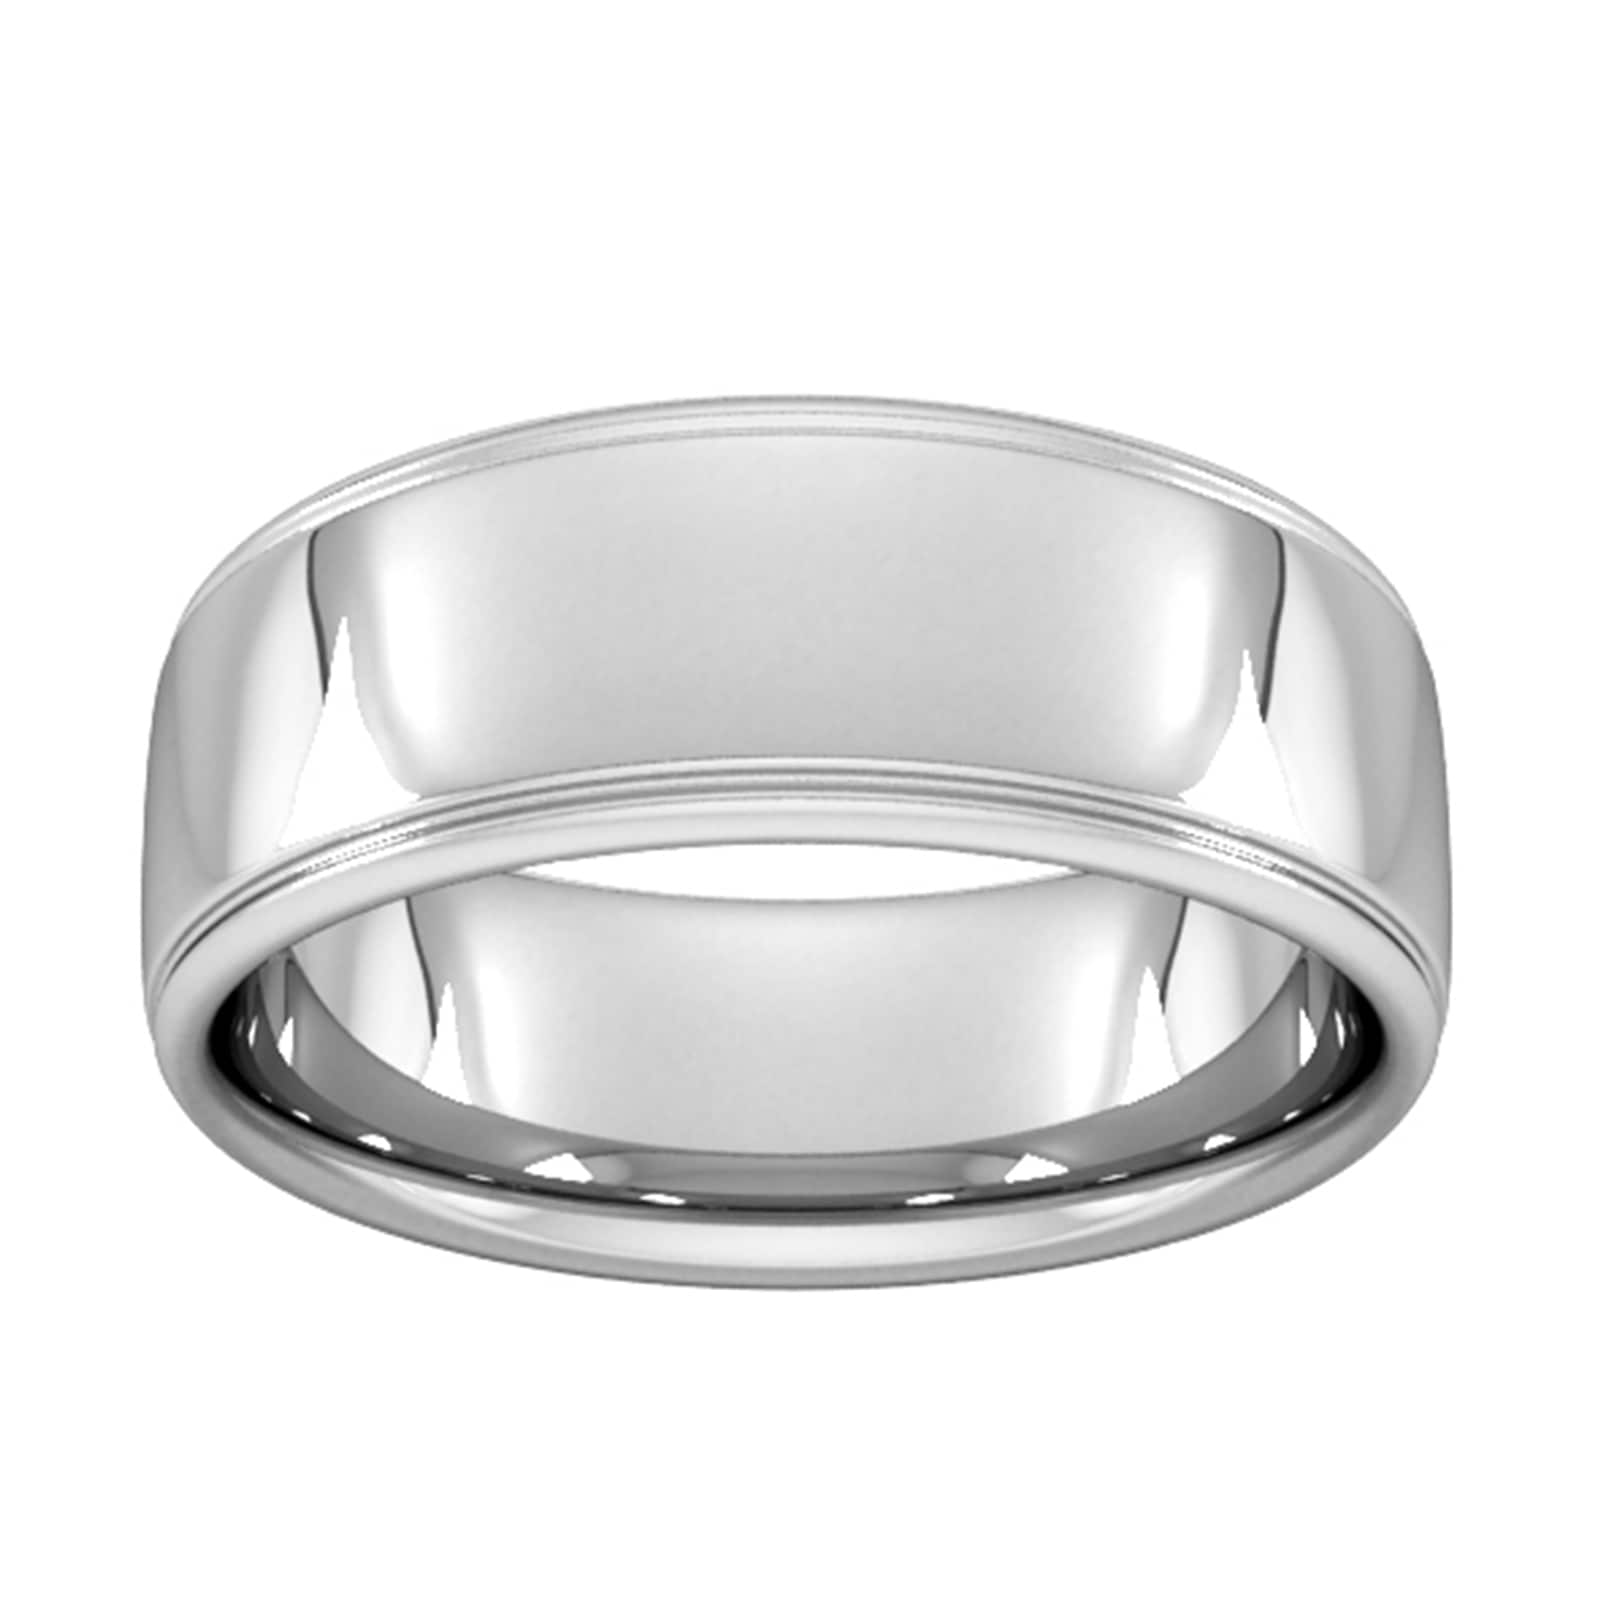 8mm Slight Court Extra Heavy Polished Finish With Grooves Wedding Ring In 950 Palladium - Ring Size L